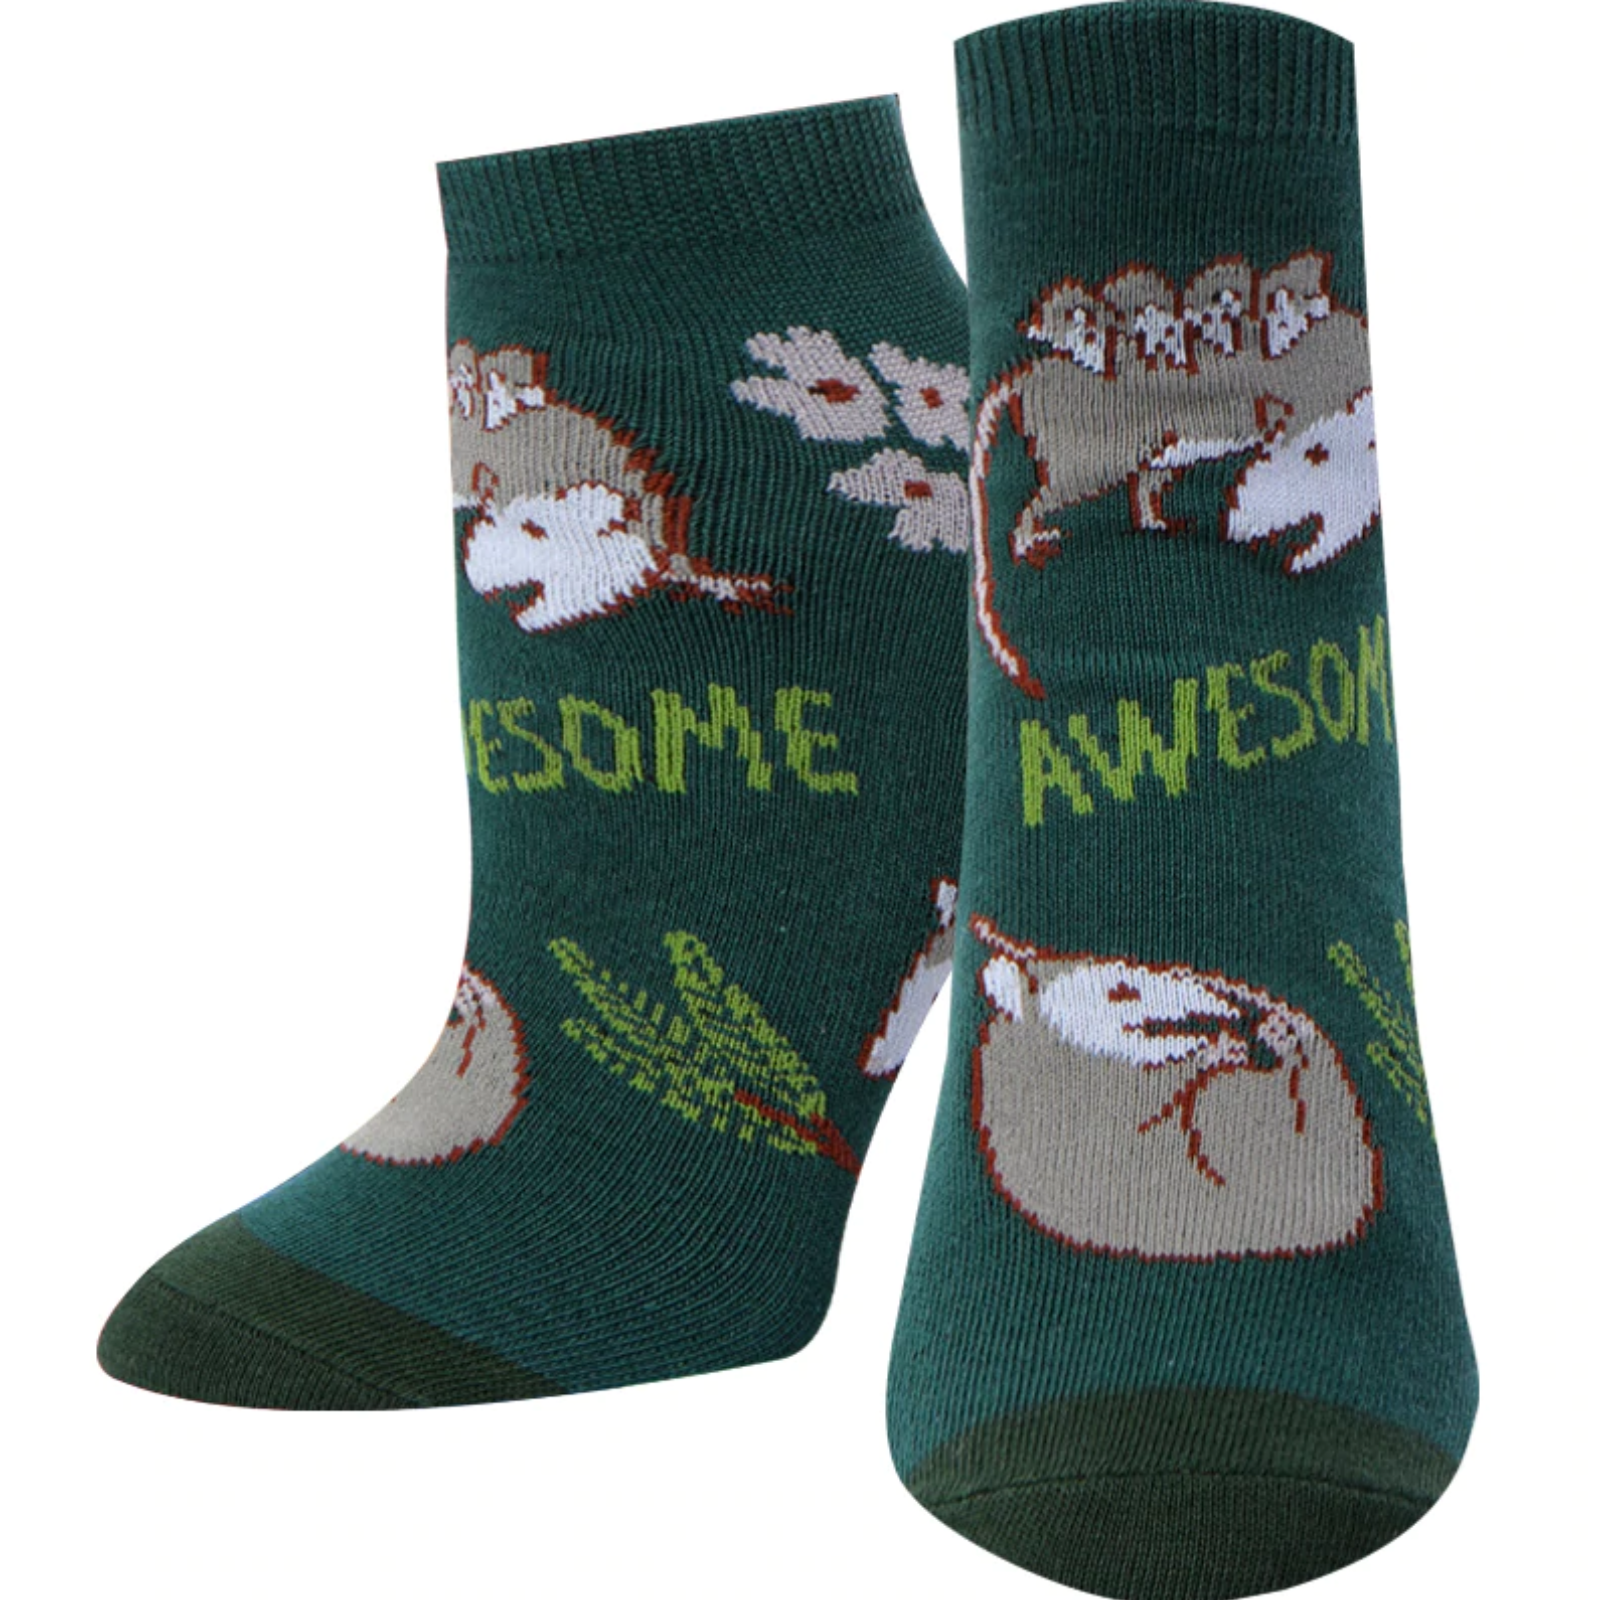 Sock Harbor Awesome Possum women's ankle sock featuring green sock with Mom possum and babies saying "Awesome"